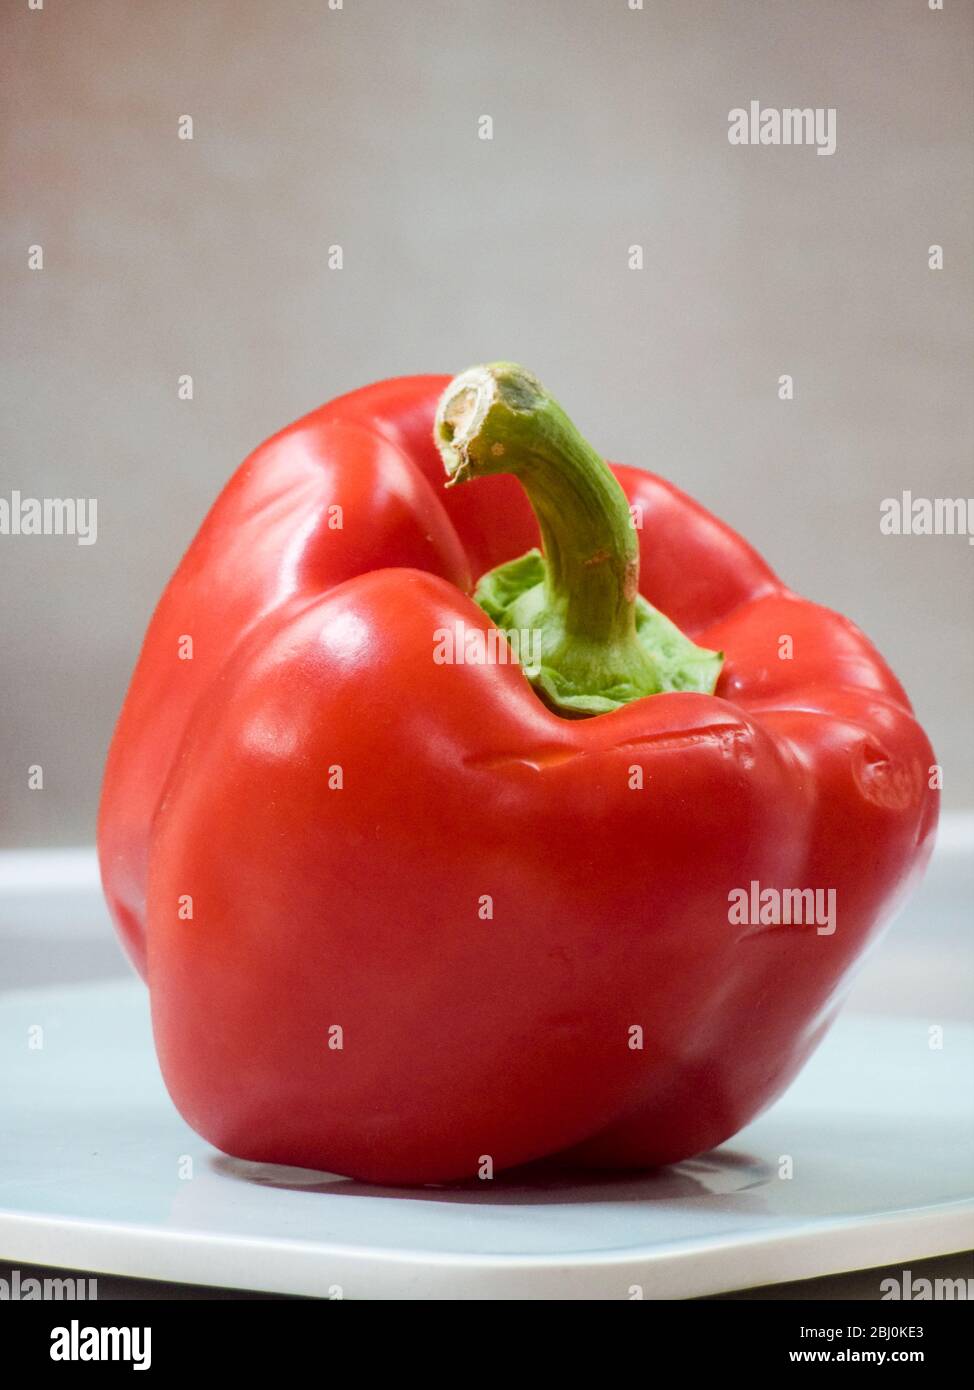 Whole shiny red sweet pepper - Stock Photo